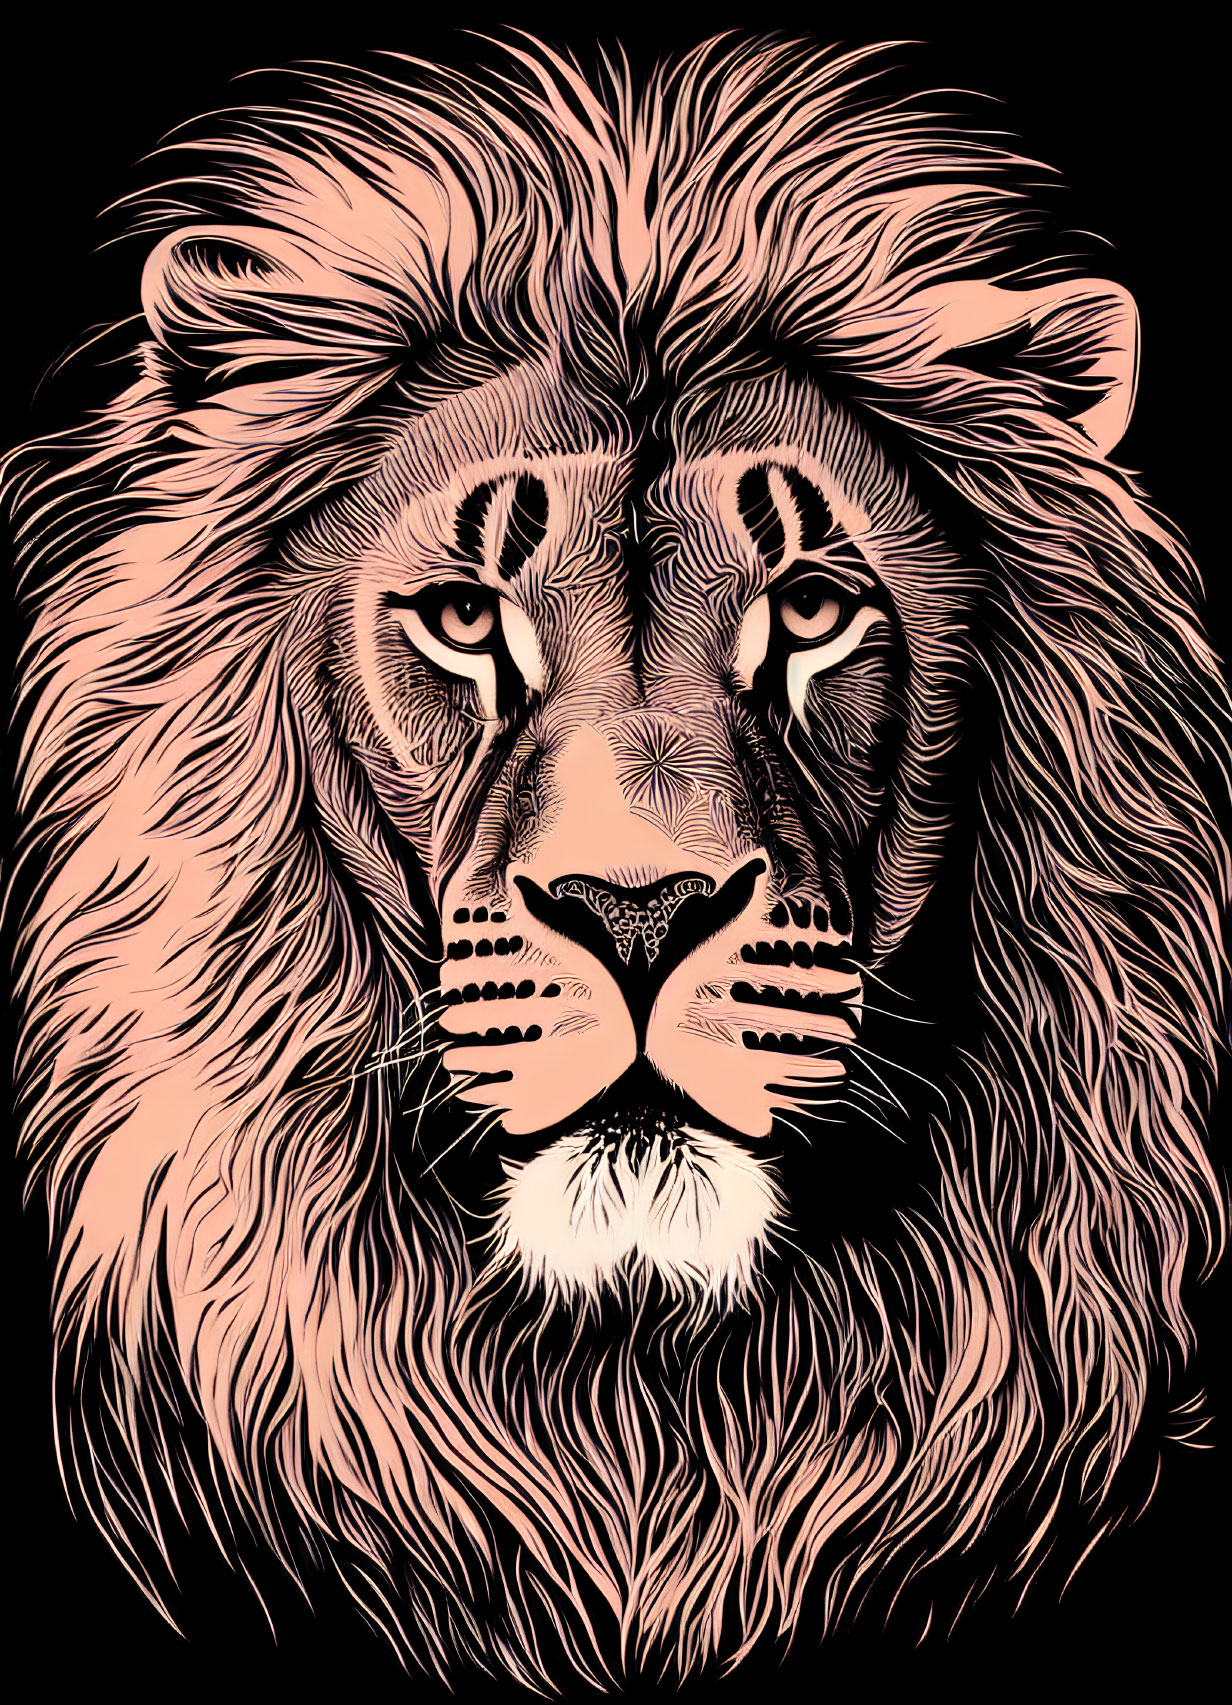 Detailed Lion Face Illustration with Geometric Patterns on Black Background